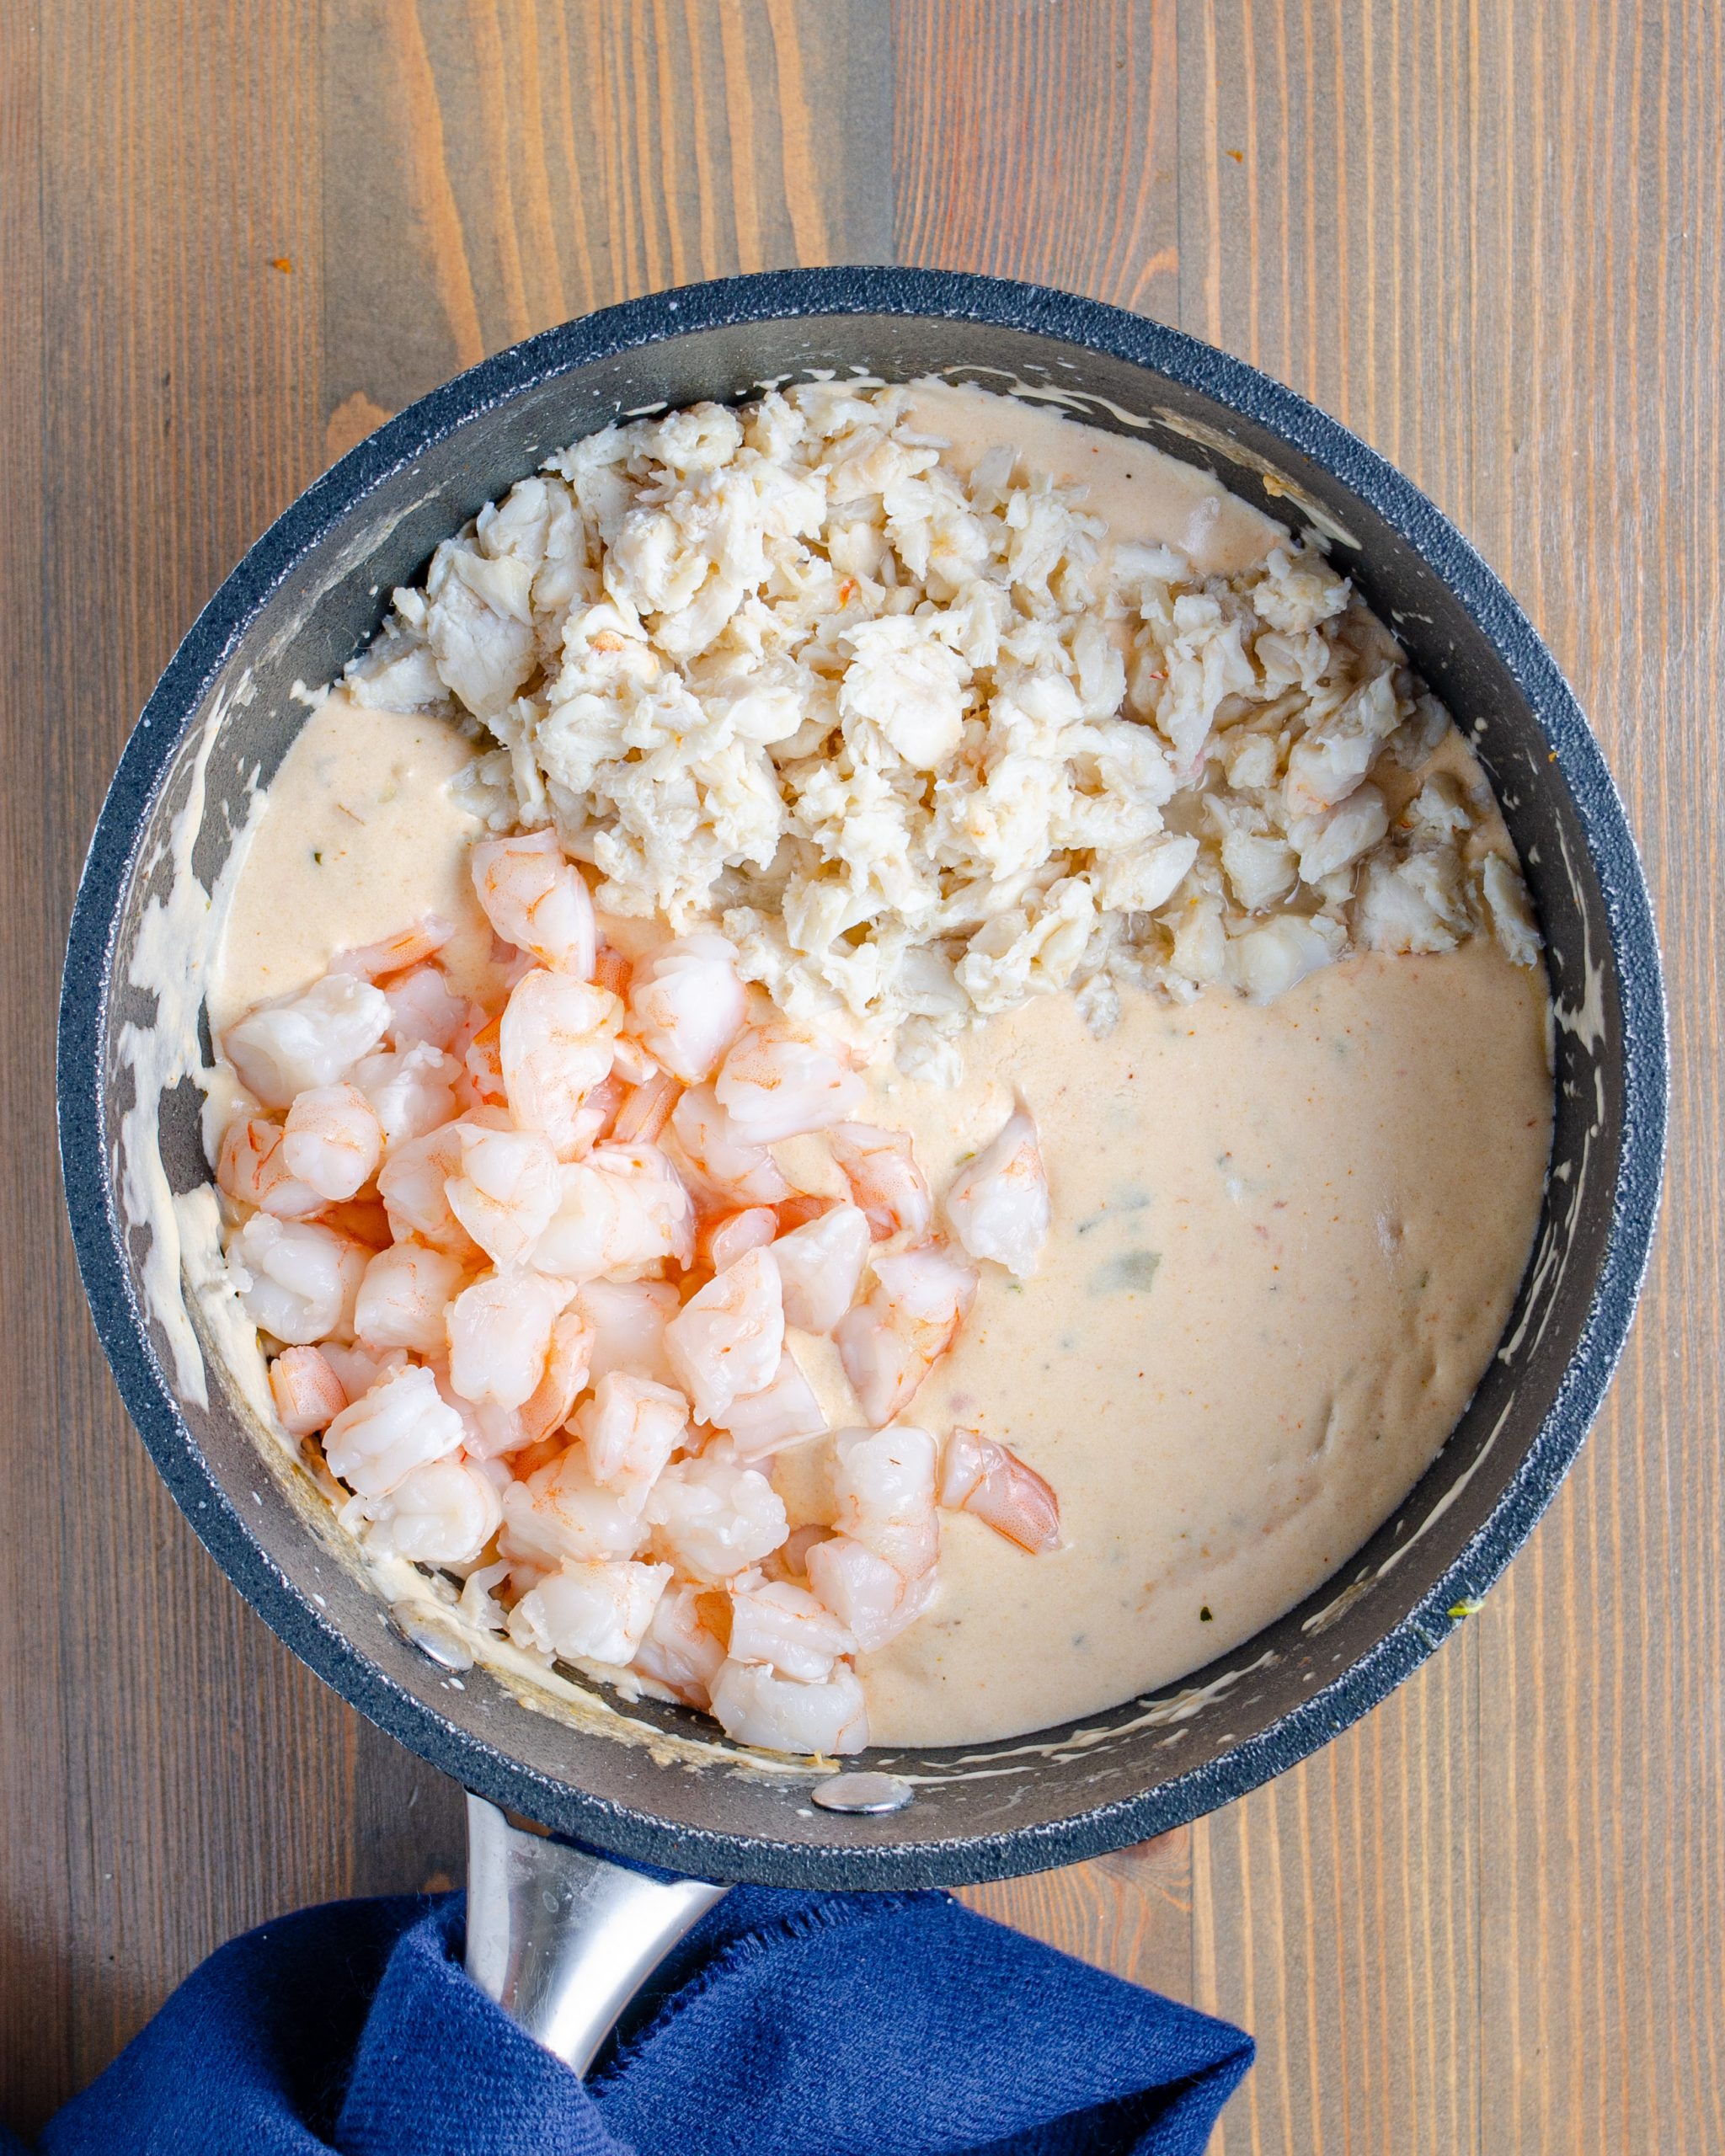 Stir in the shrimp and the crab meat.